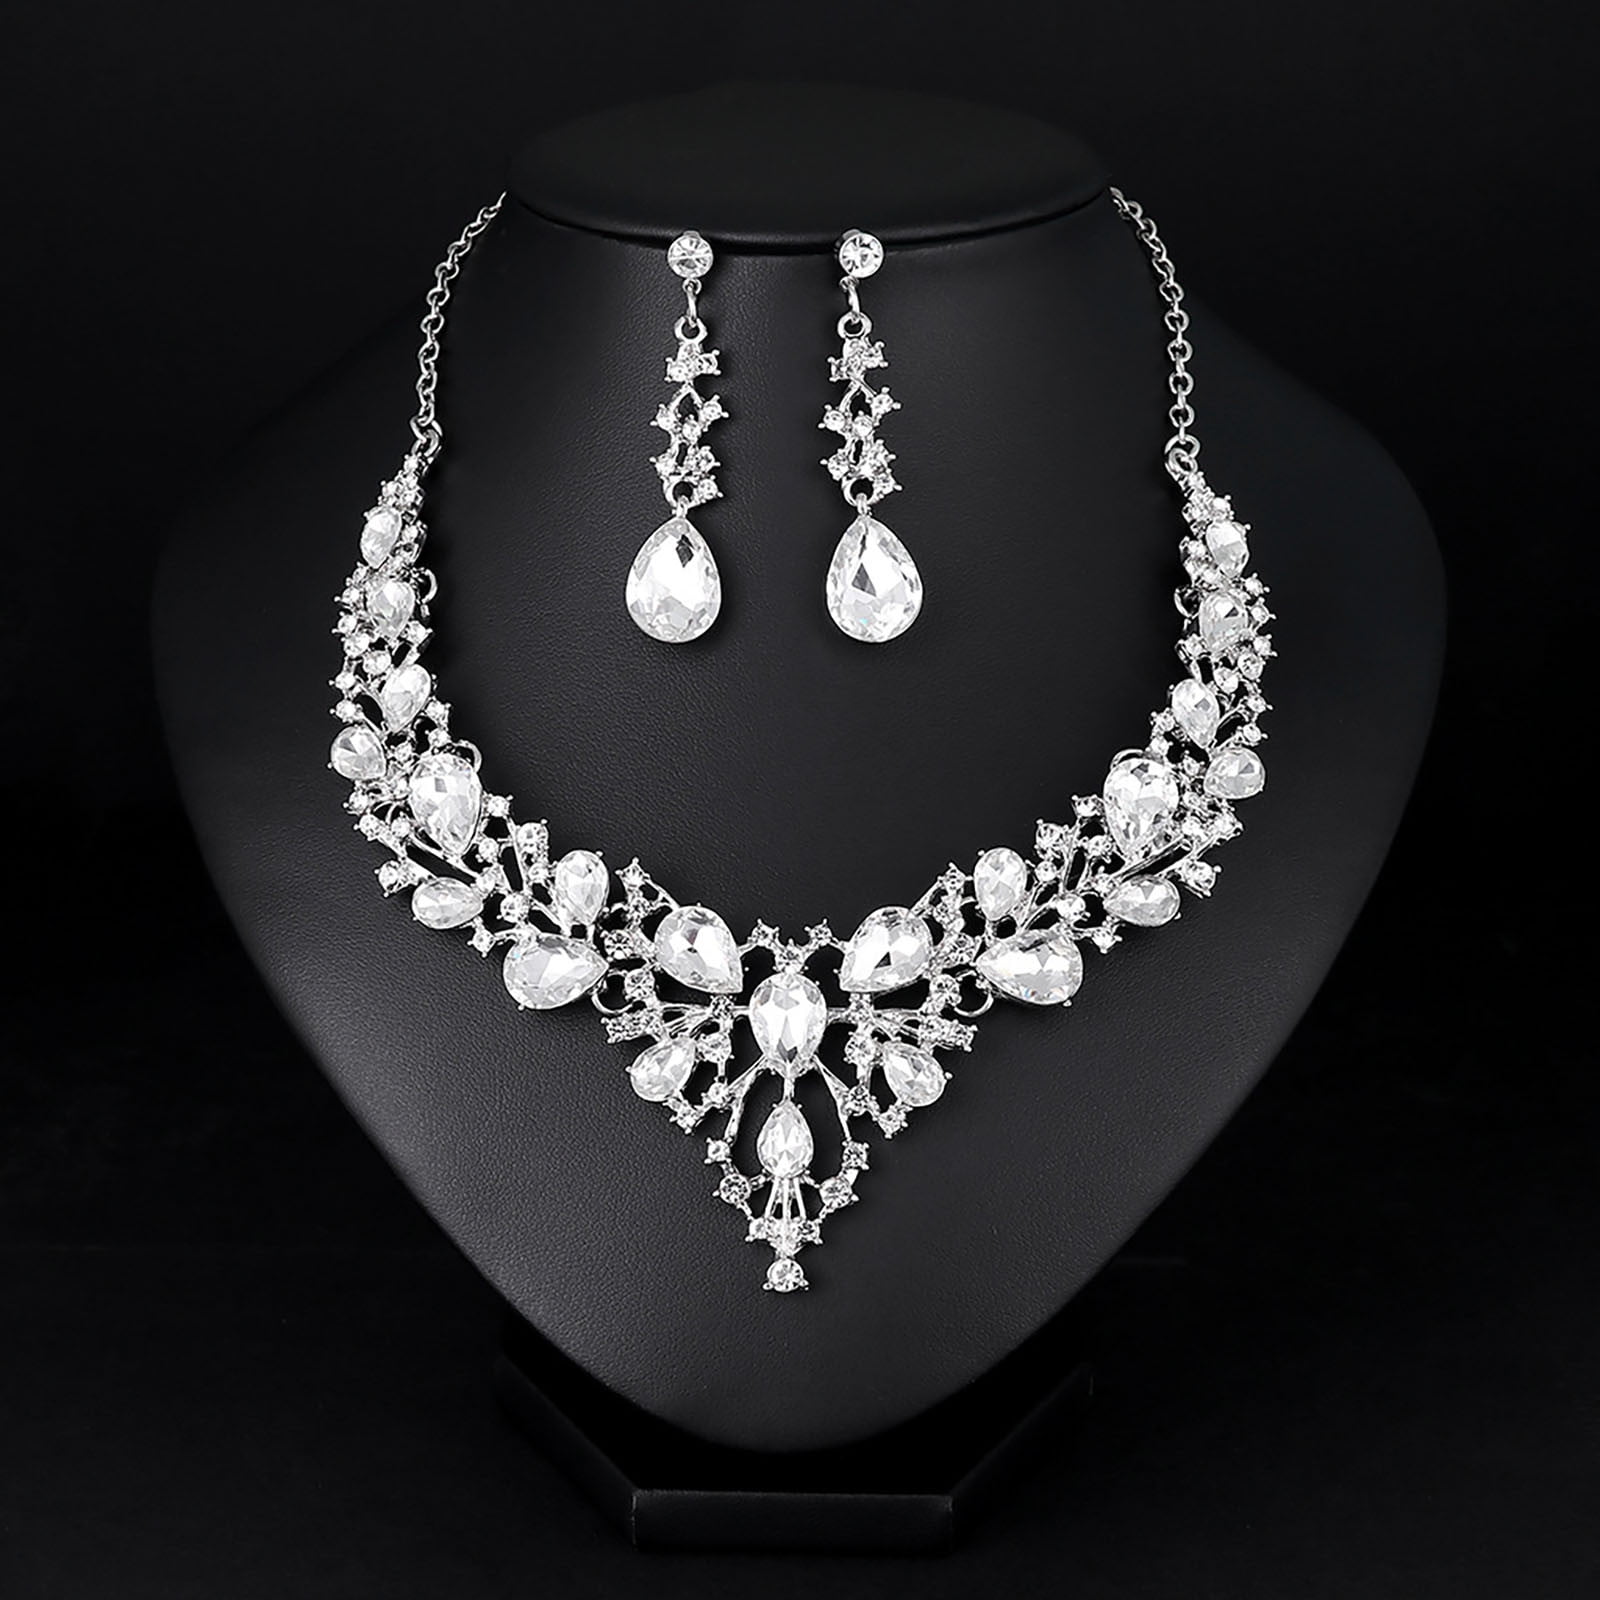 Party Alloy Rhinestone Earrings Crystal Pendant Necklace Bridal Jewelry Set